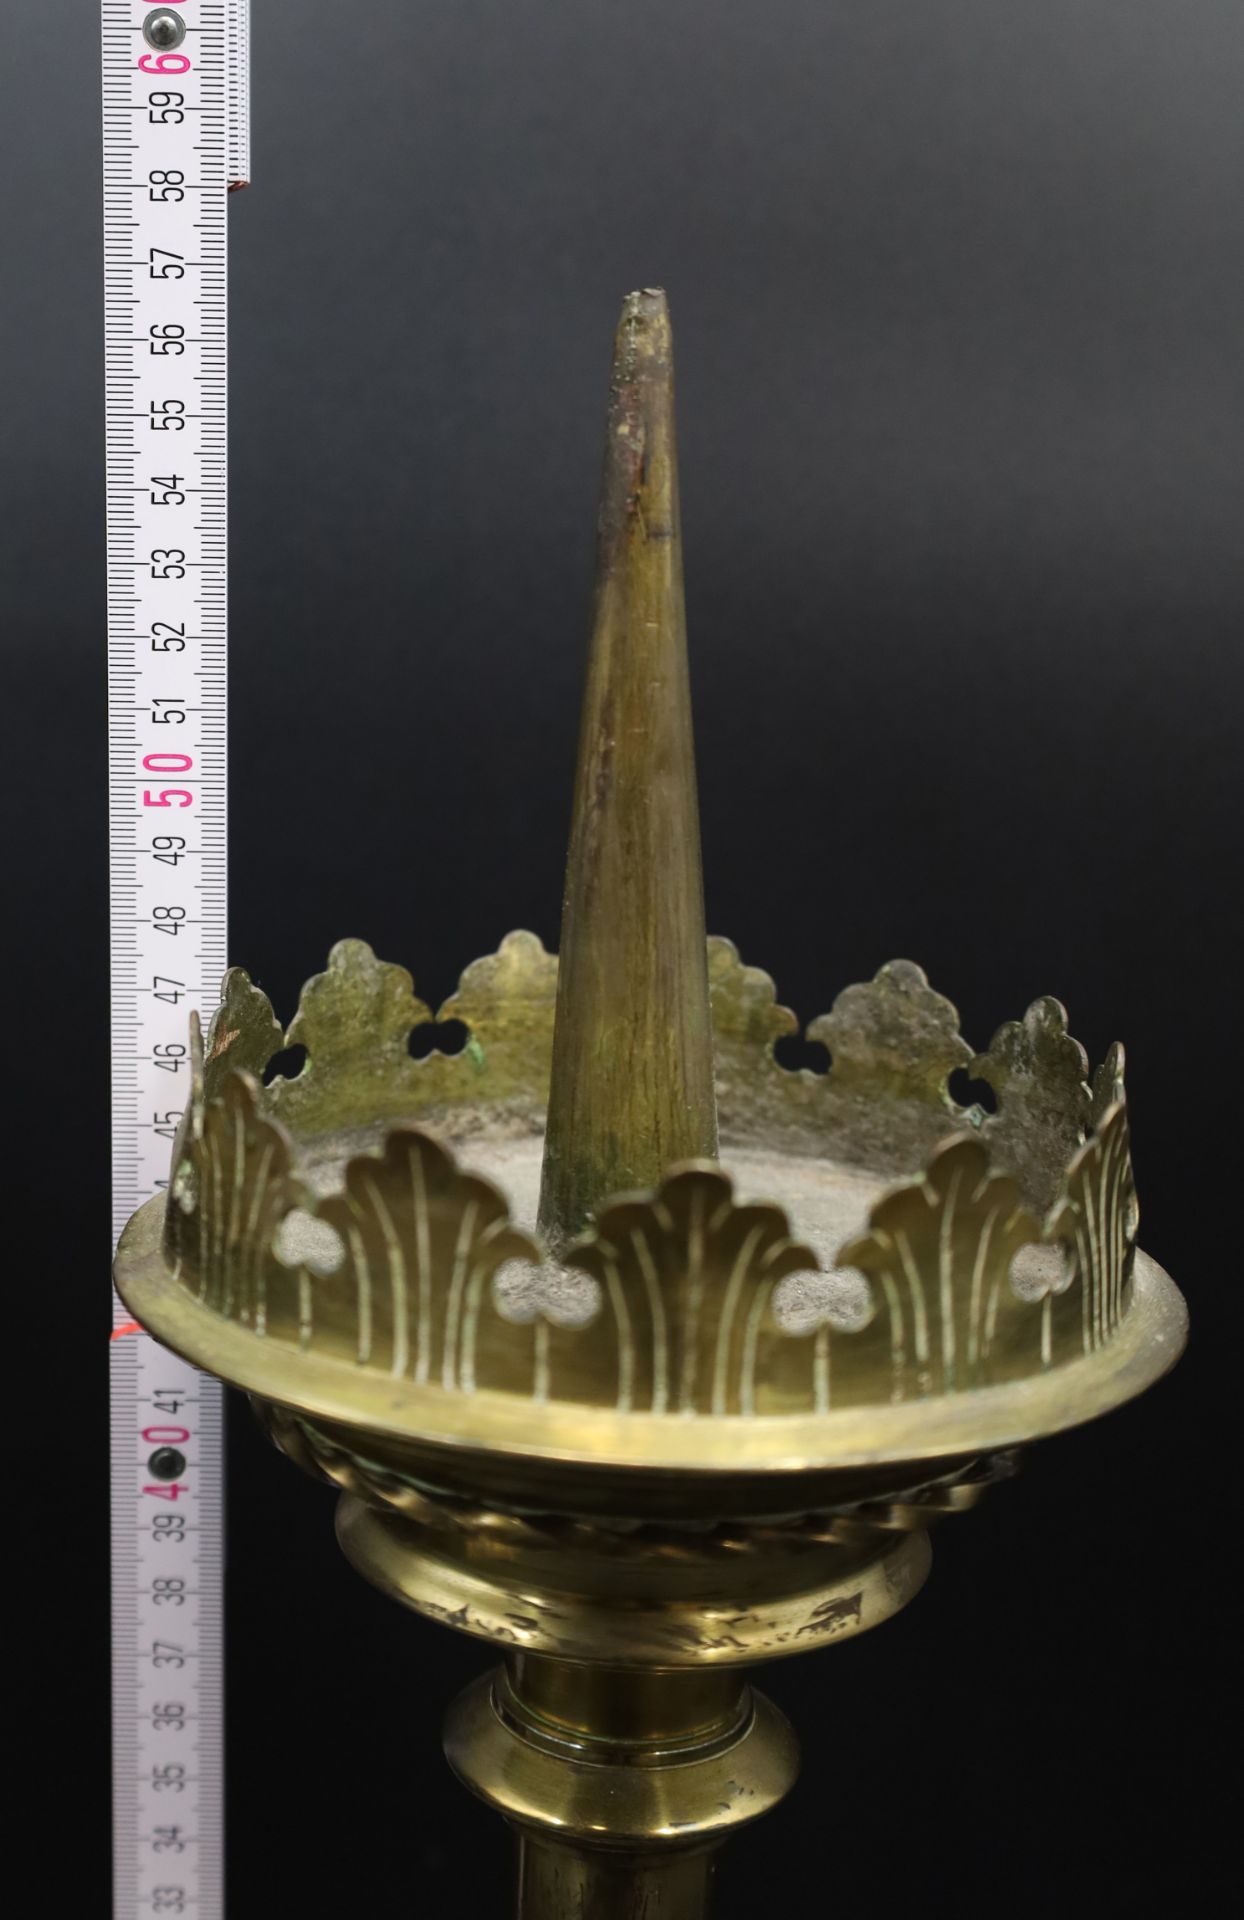 Two altar candlesticks. Brass. Around 1900. - Image 13 of 14